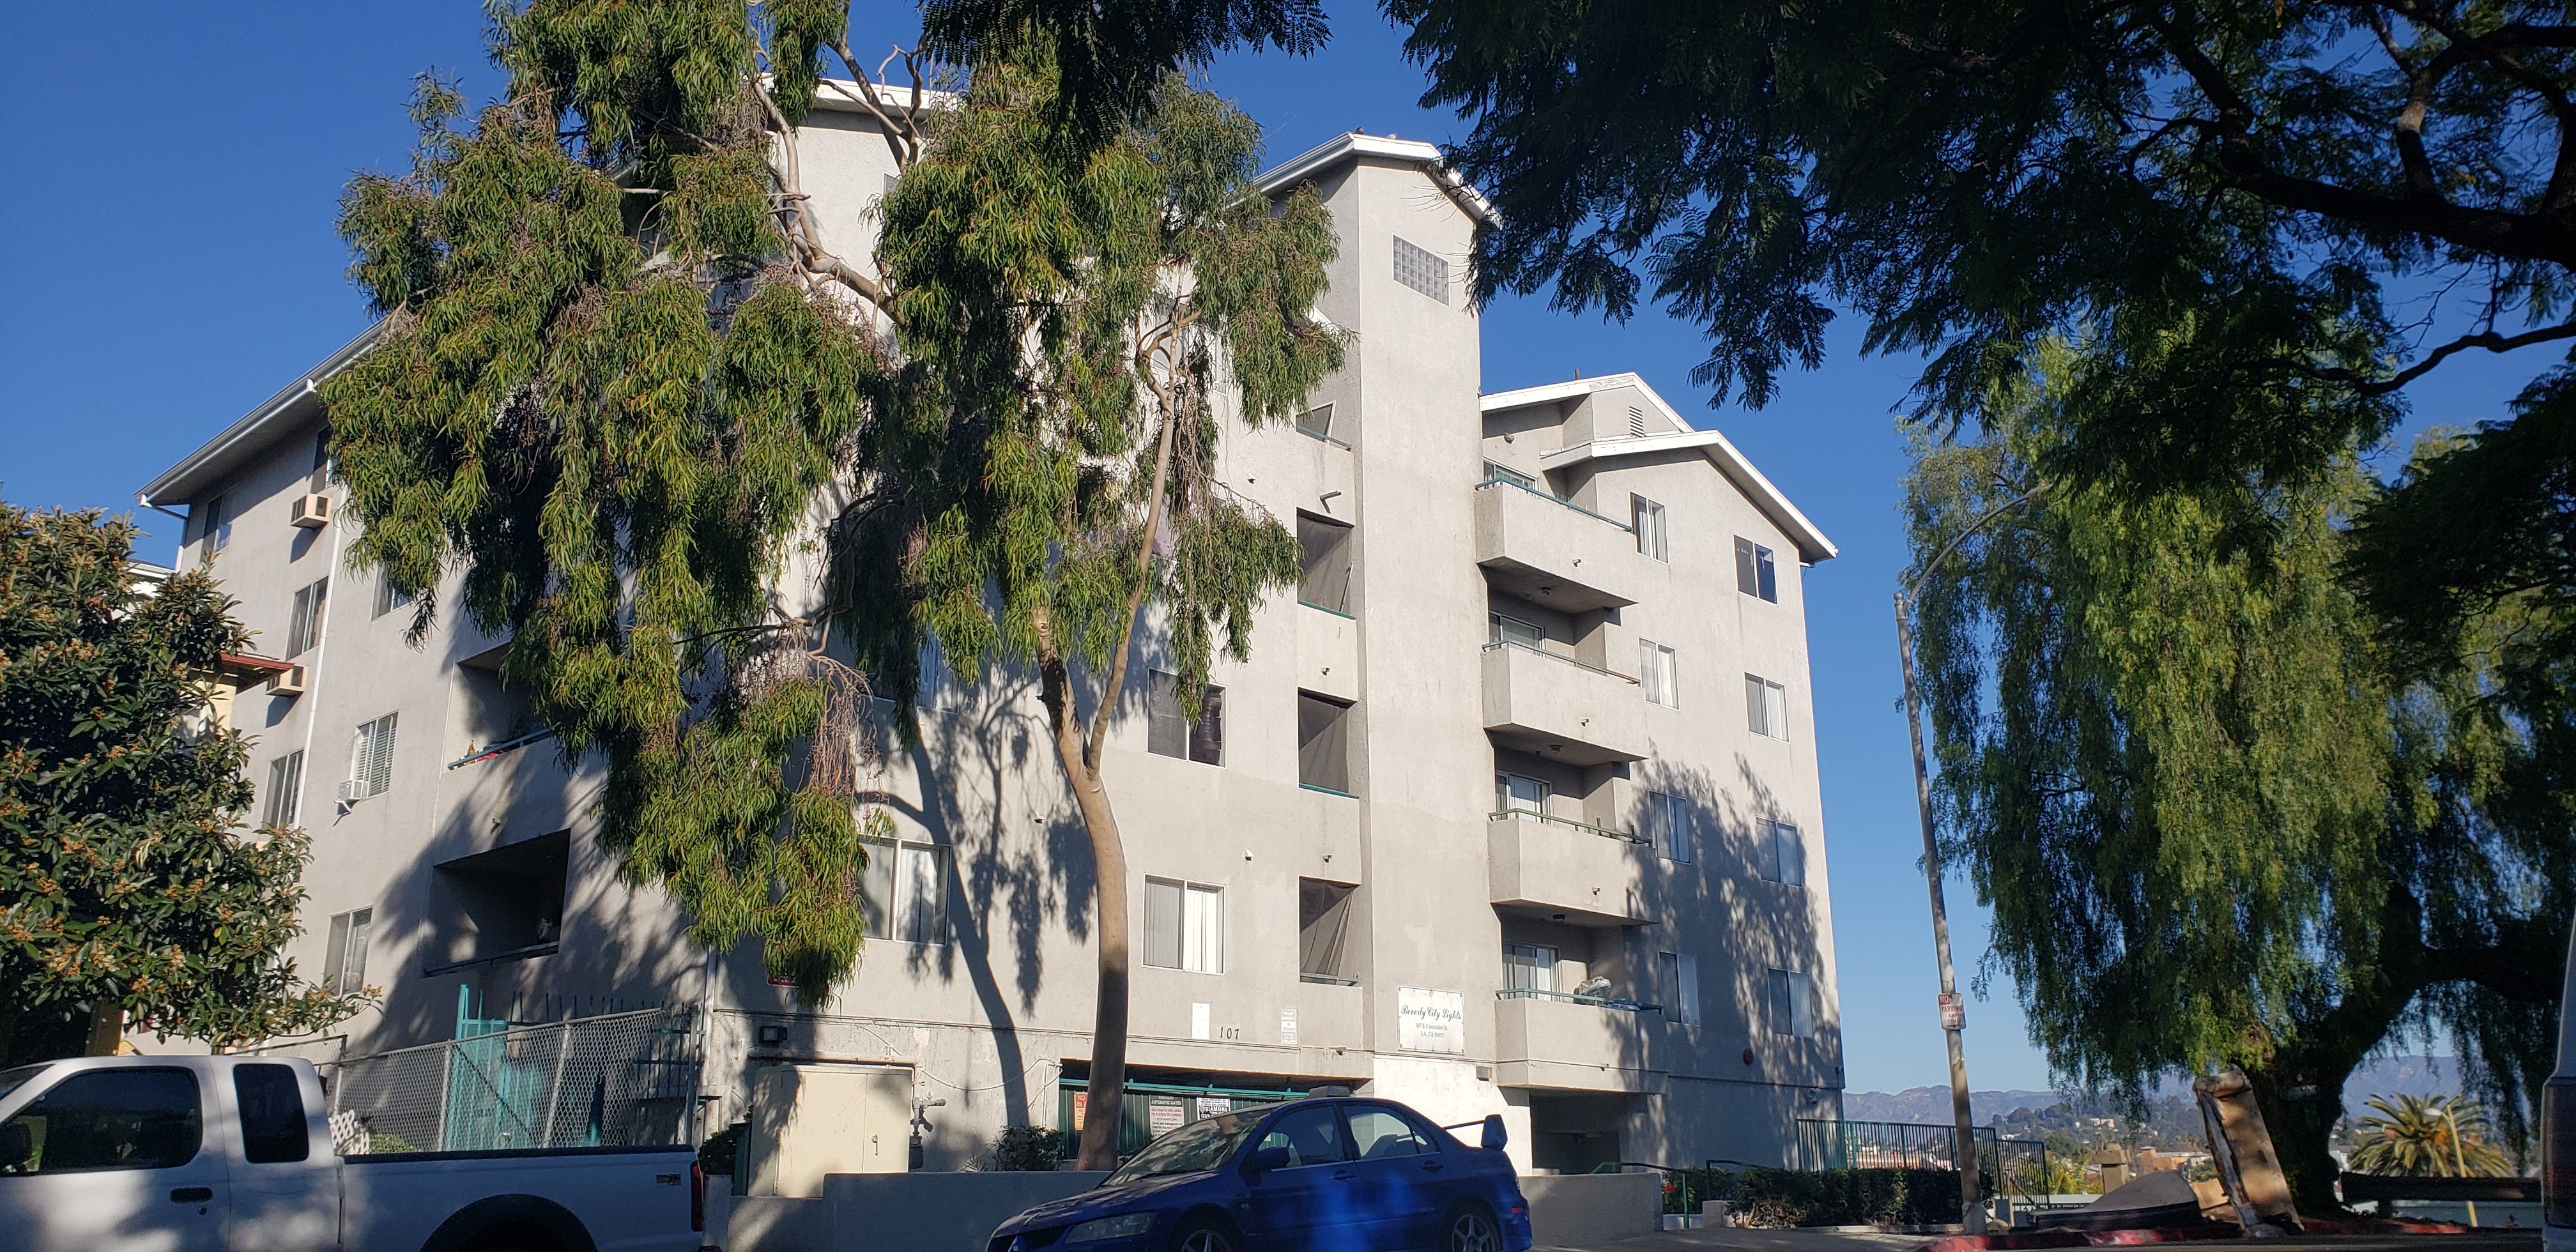 Front view of Beverly city lights. Multi-level light grey building. Units with balcony access. Parking garage gate located at bottom of building. Building entrance has stairs leading down. Street and sidewalks lined with trees and bushes. Cars parked on s